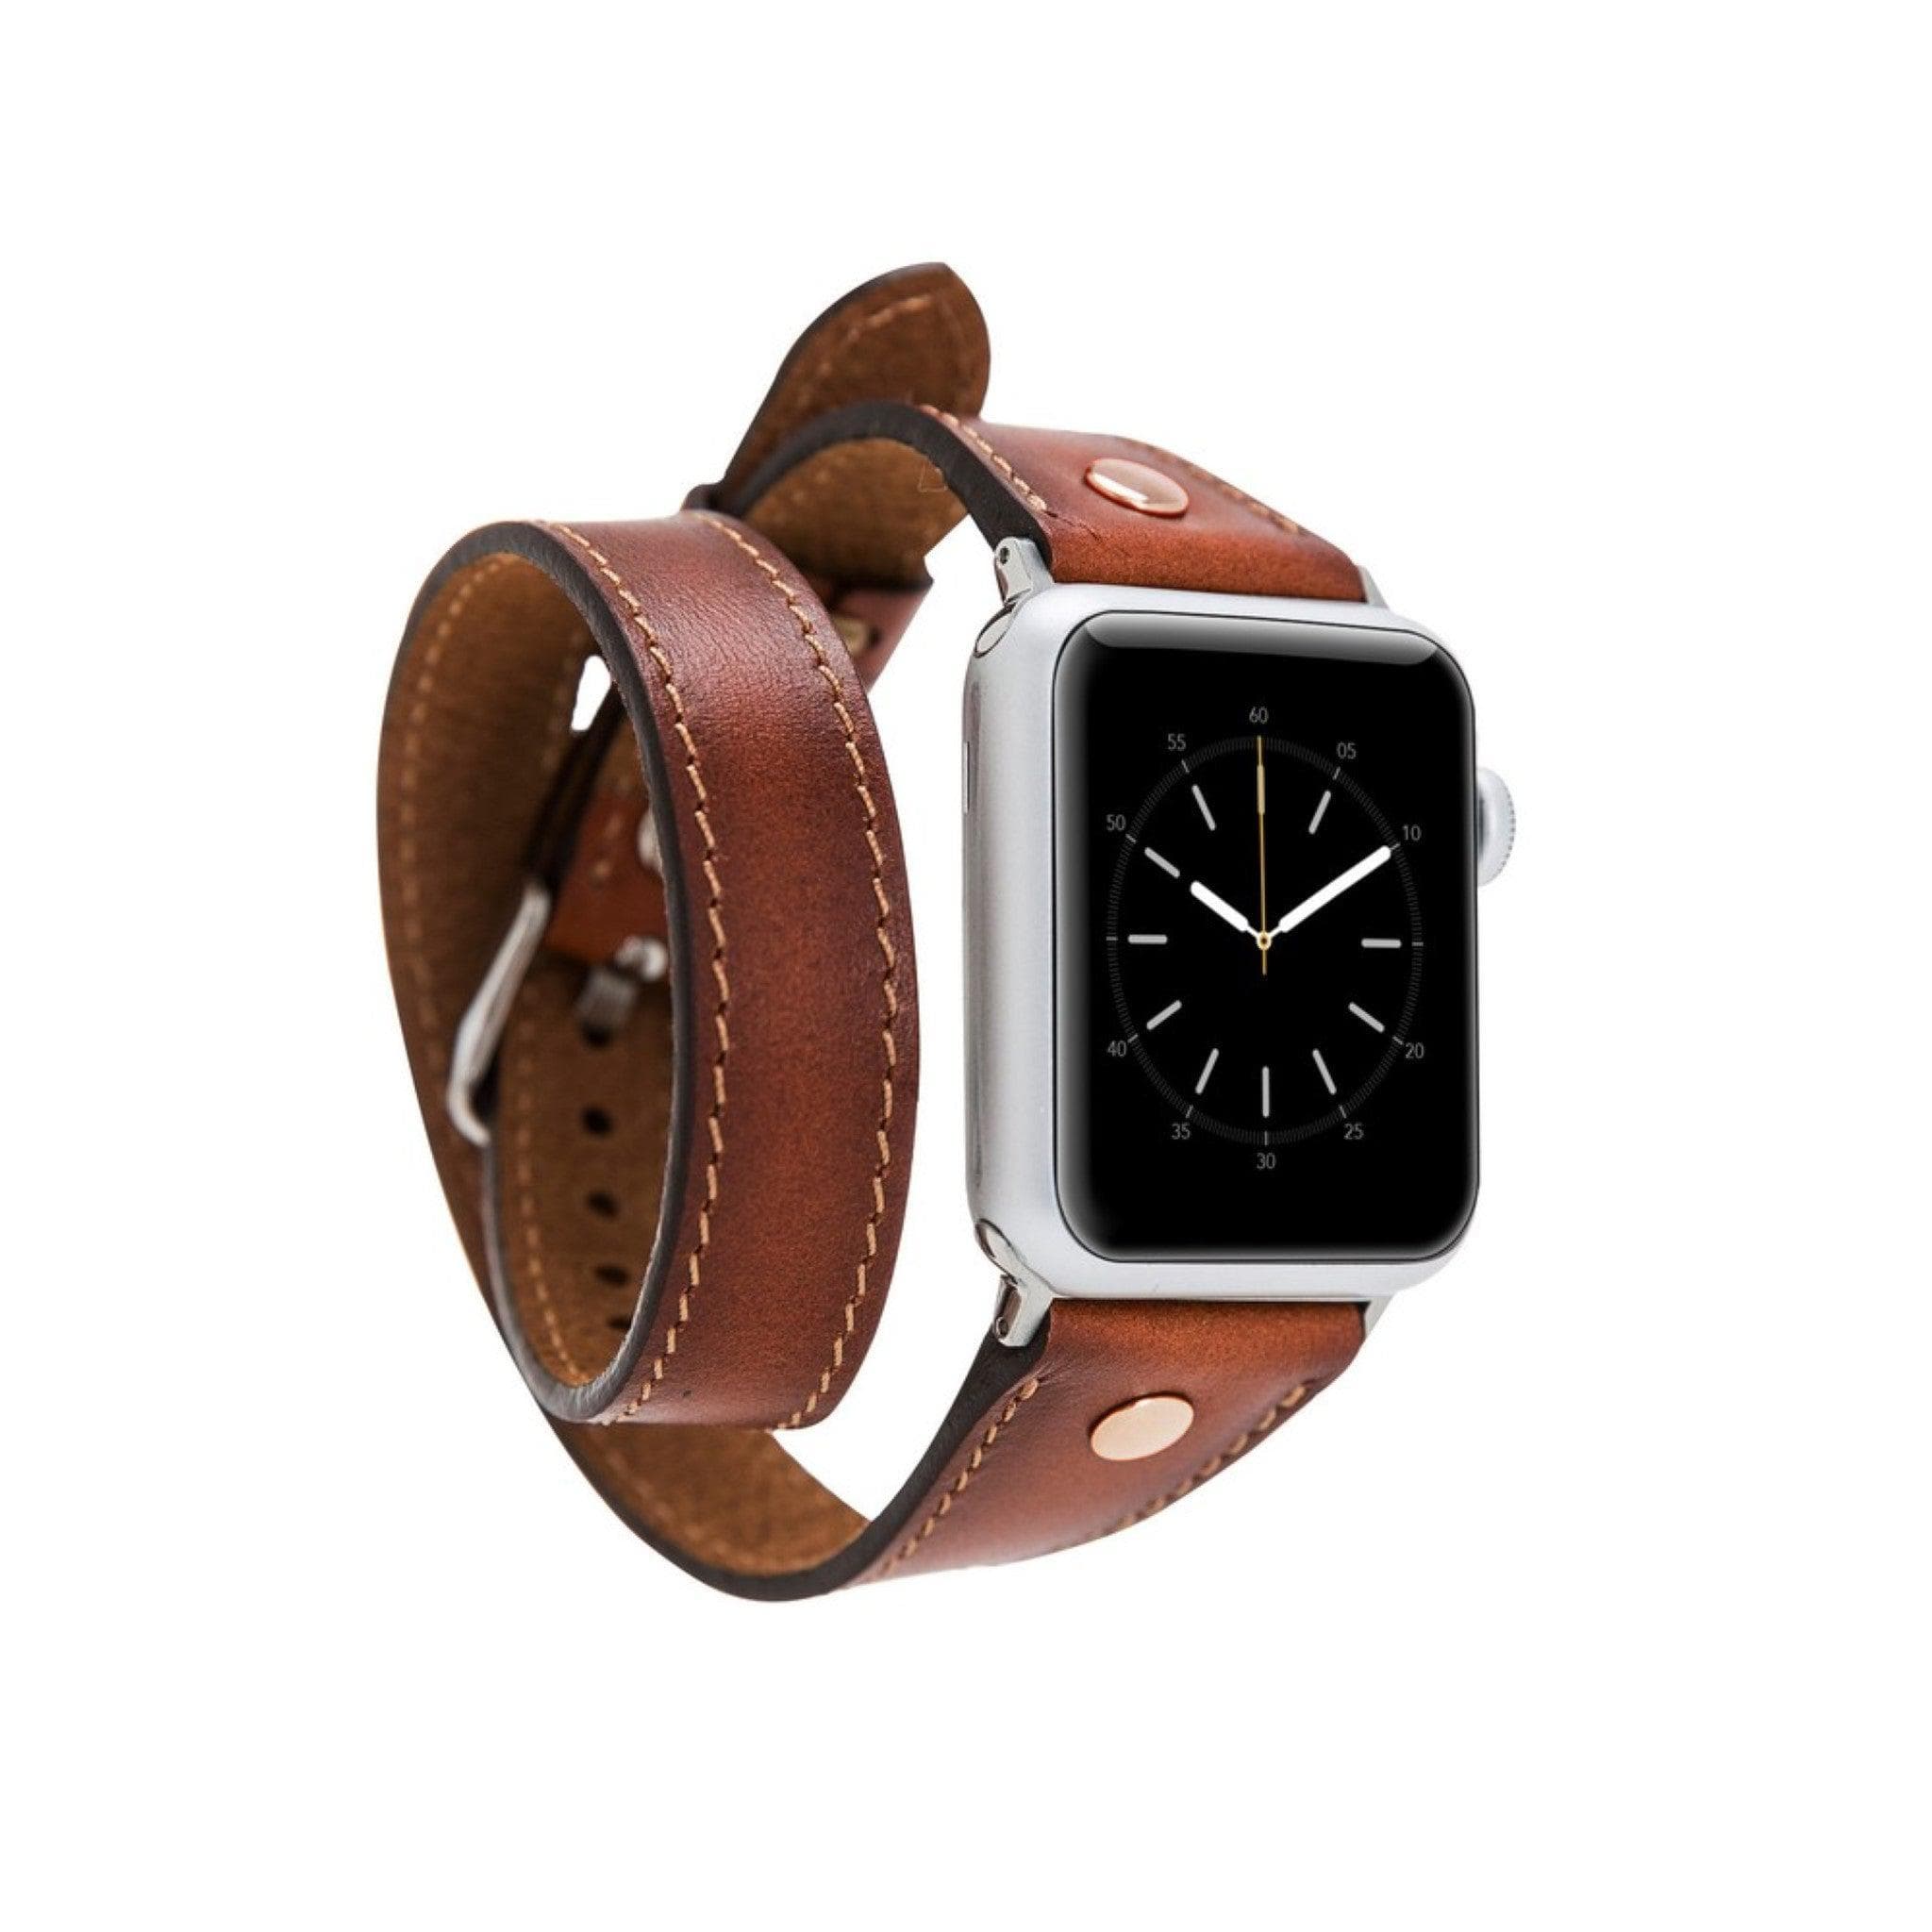 Leeds Double Tour Slim with Rose Gold Bead Apple Watch Leather Straps Tan Bouletta LTD